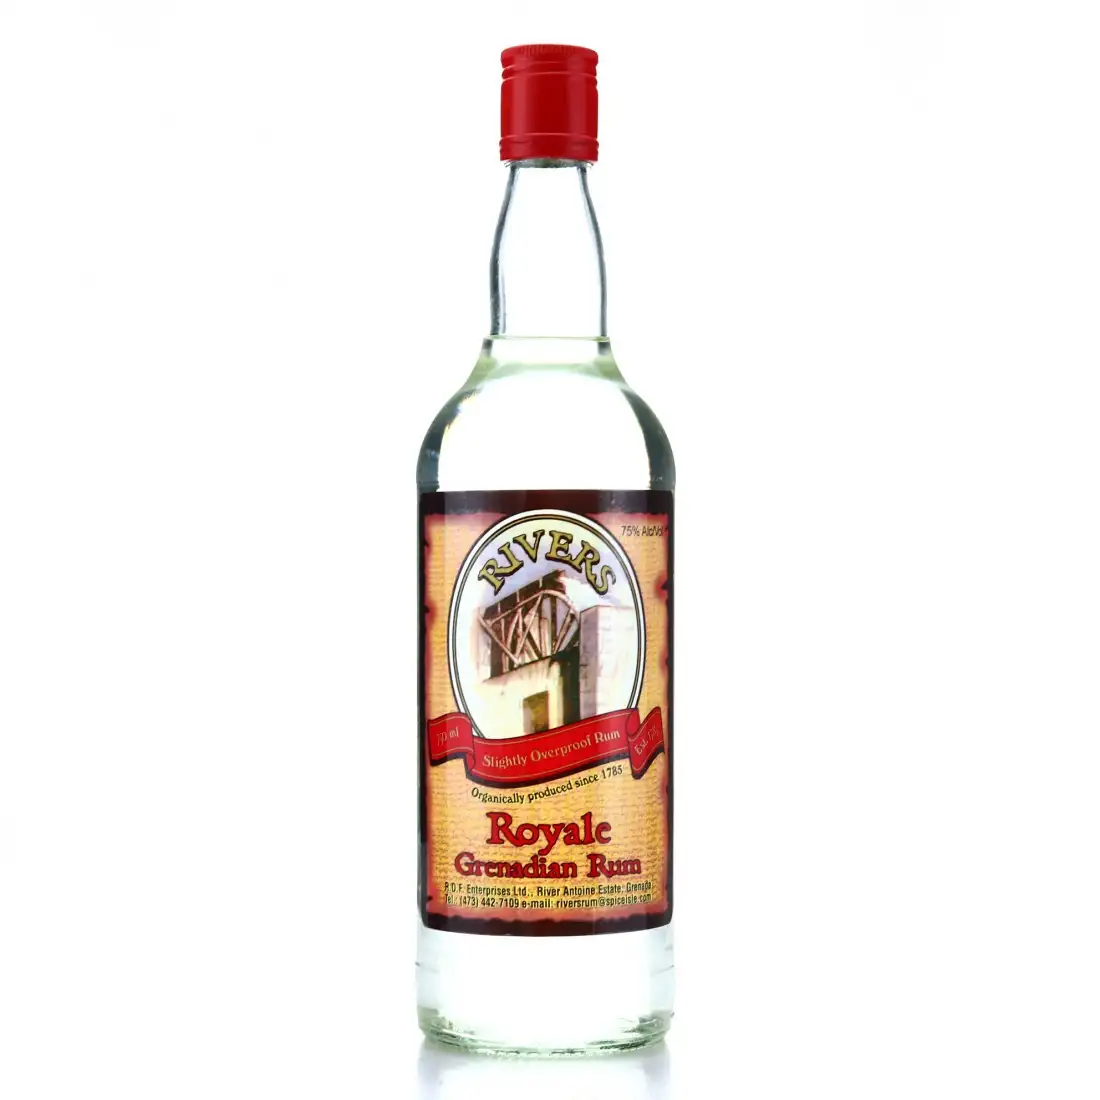 Image of the front of the bottle of the rum Rivers Royale Grenadian Rum